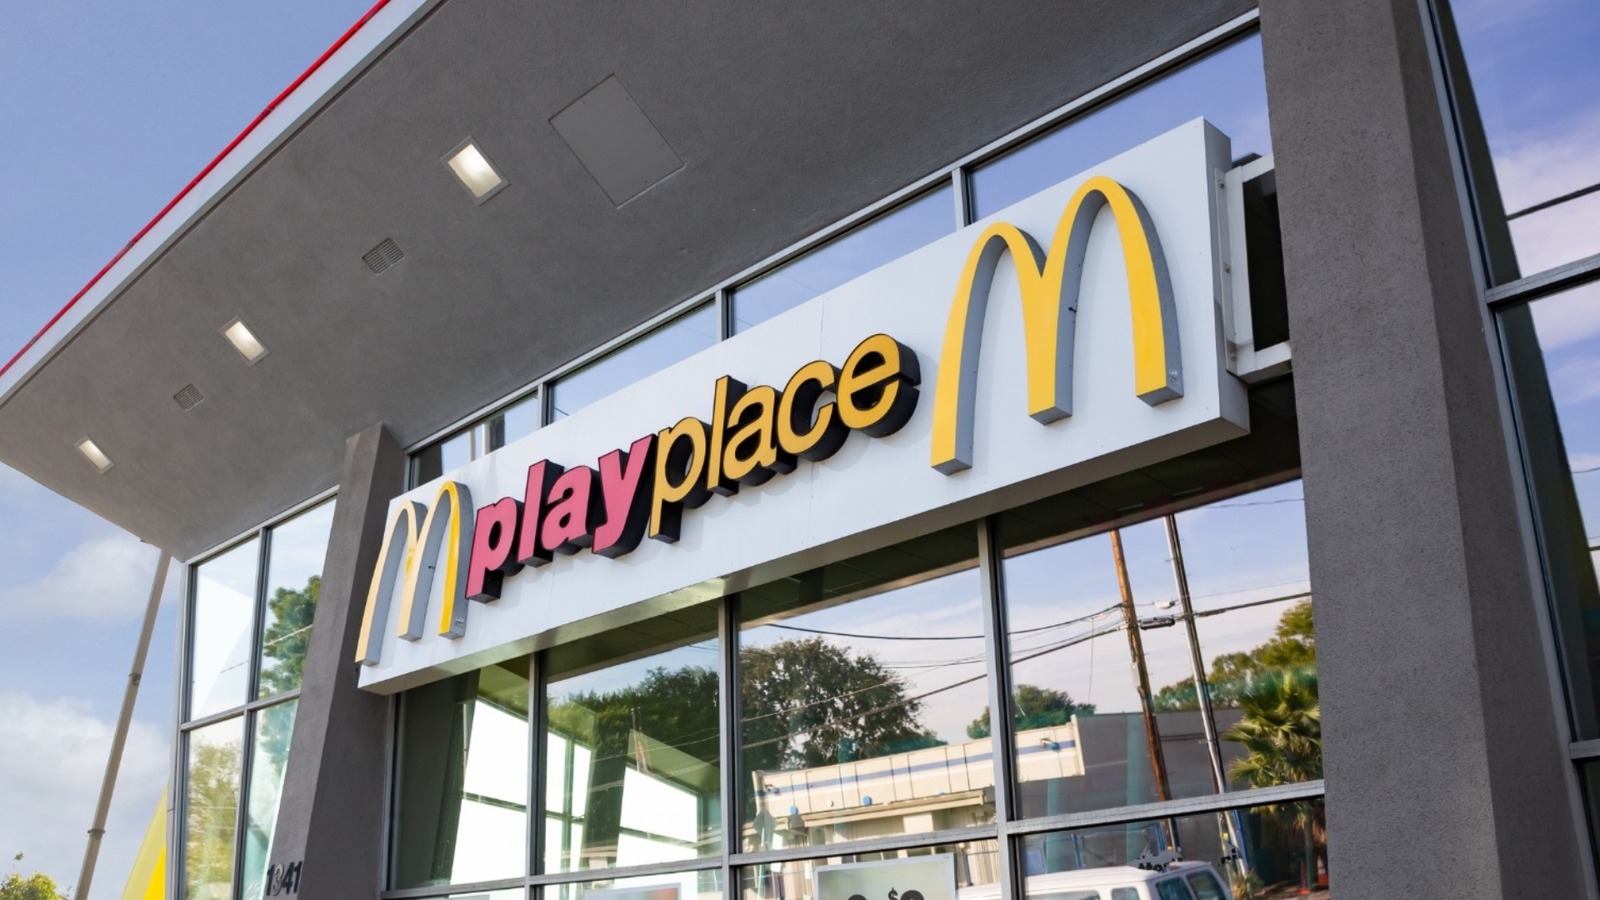 Whatever Happened To McDonald's PlayPlaces?